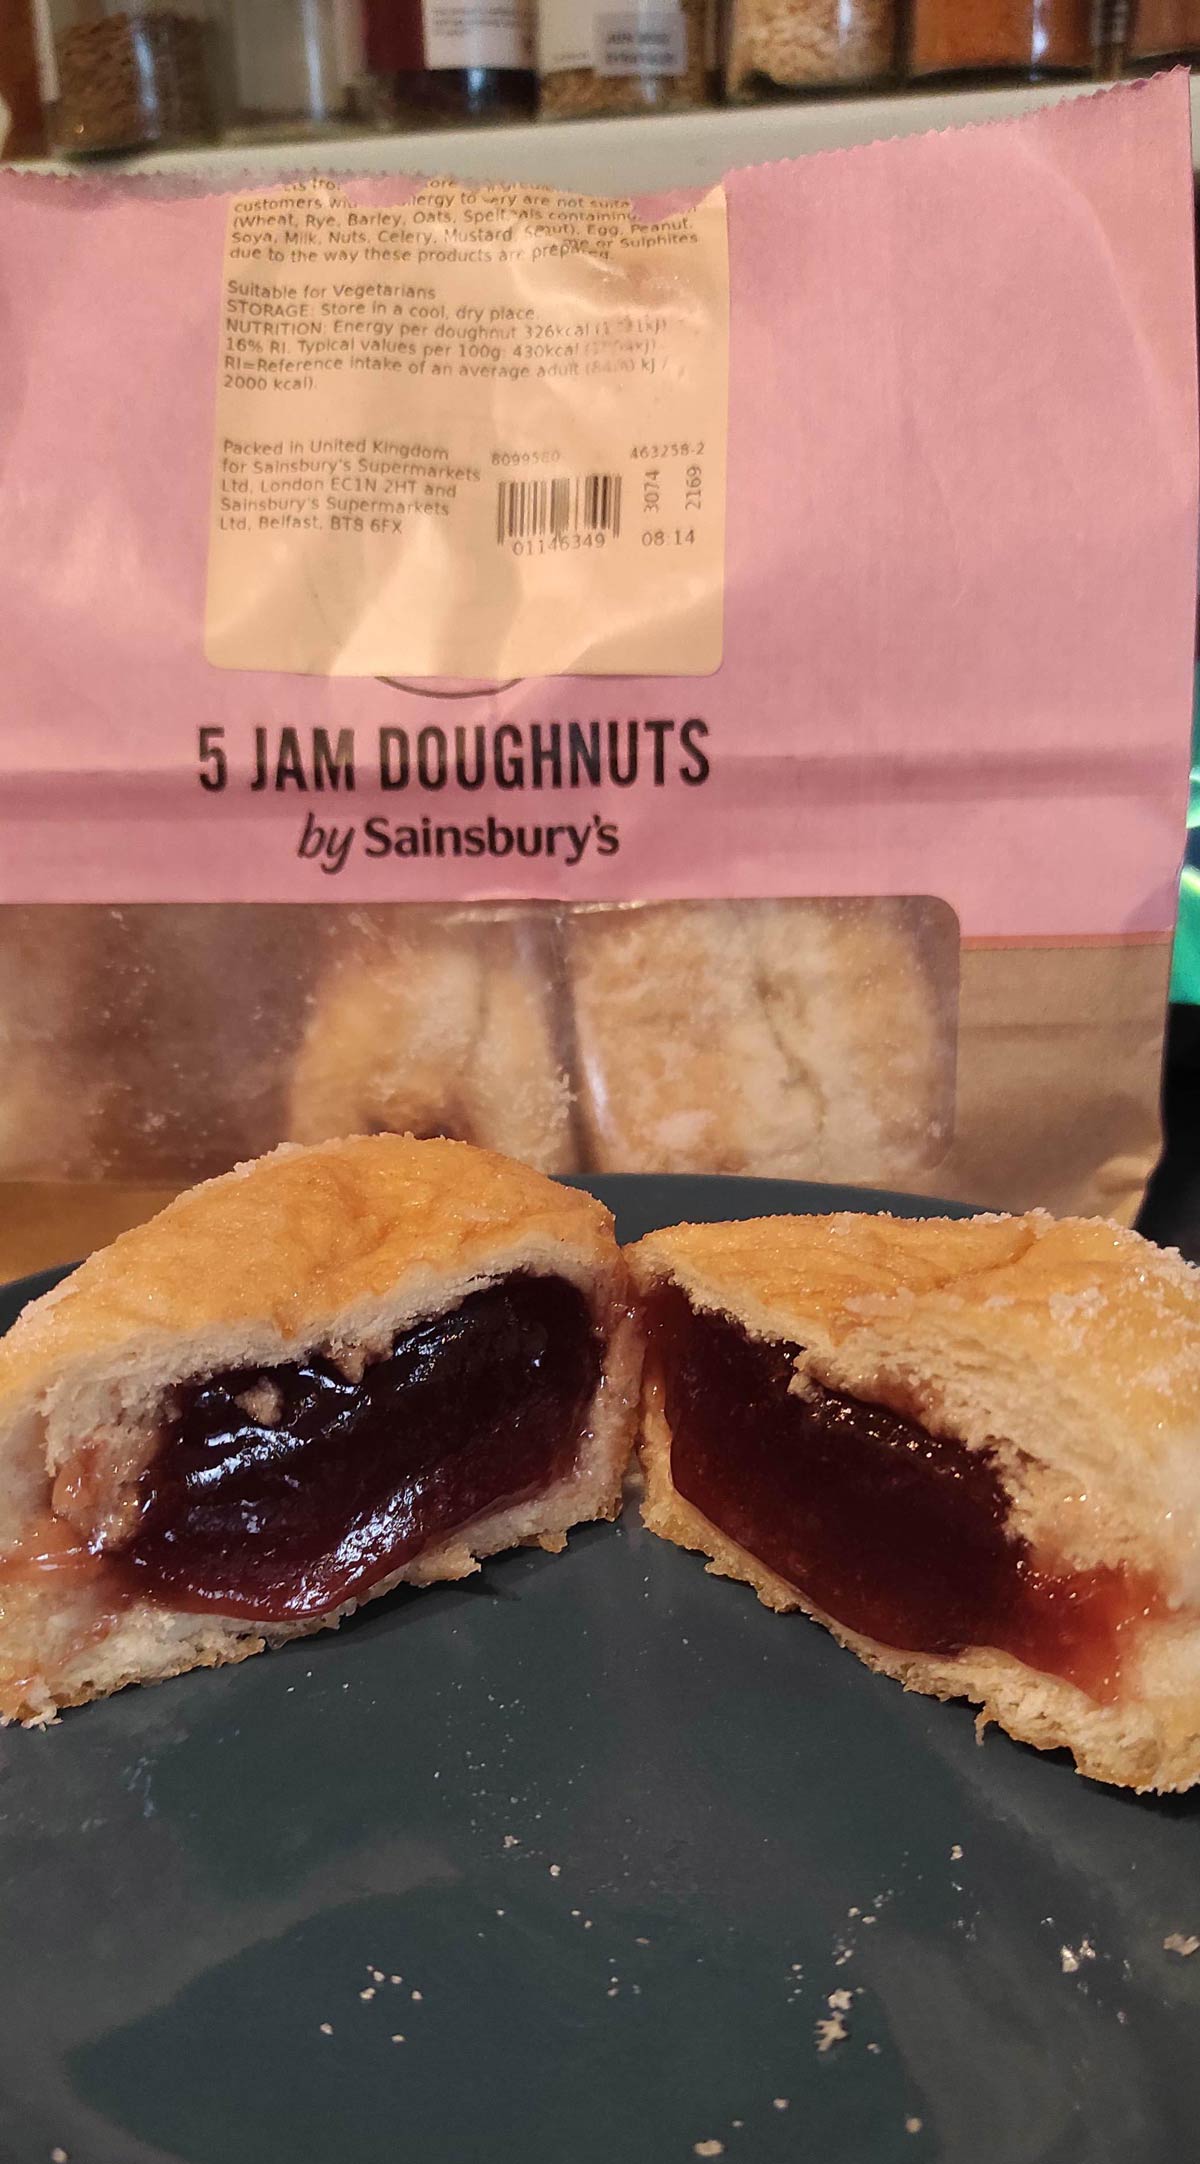 Shout-out to whoever was working the bakery in Newcastle-under-Lyme Sainsbury's 90% jam, jam donut